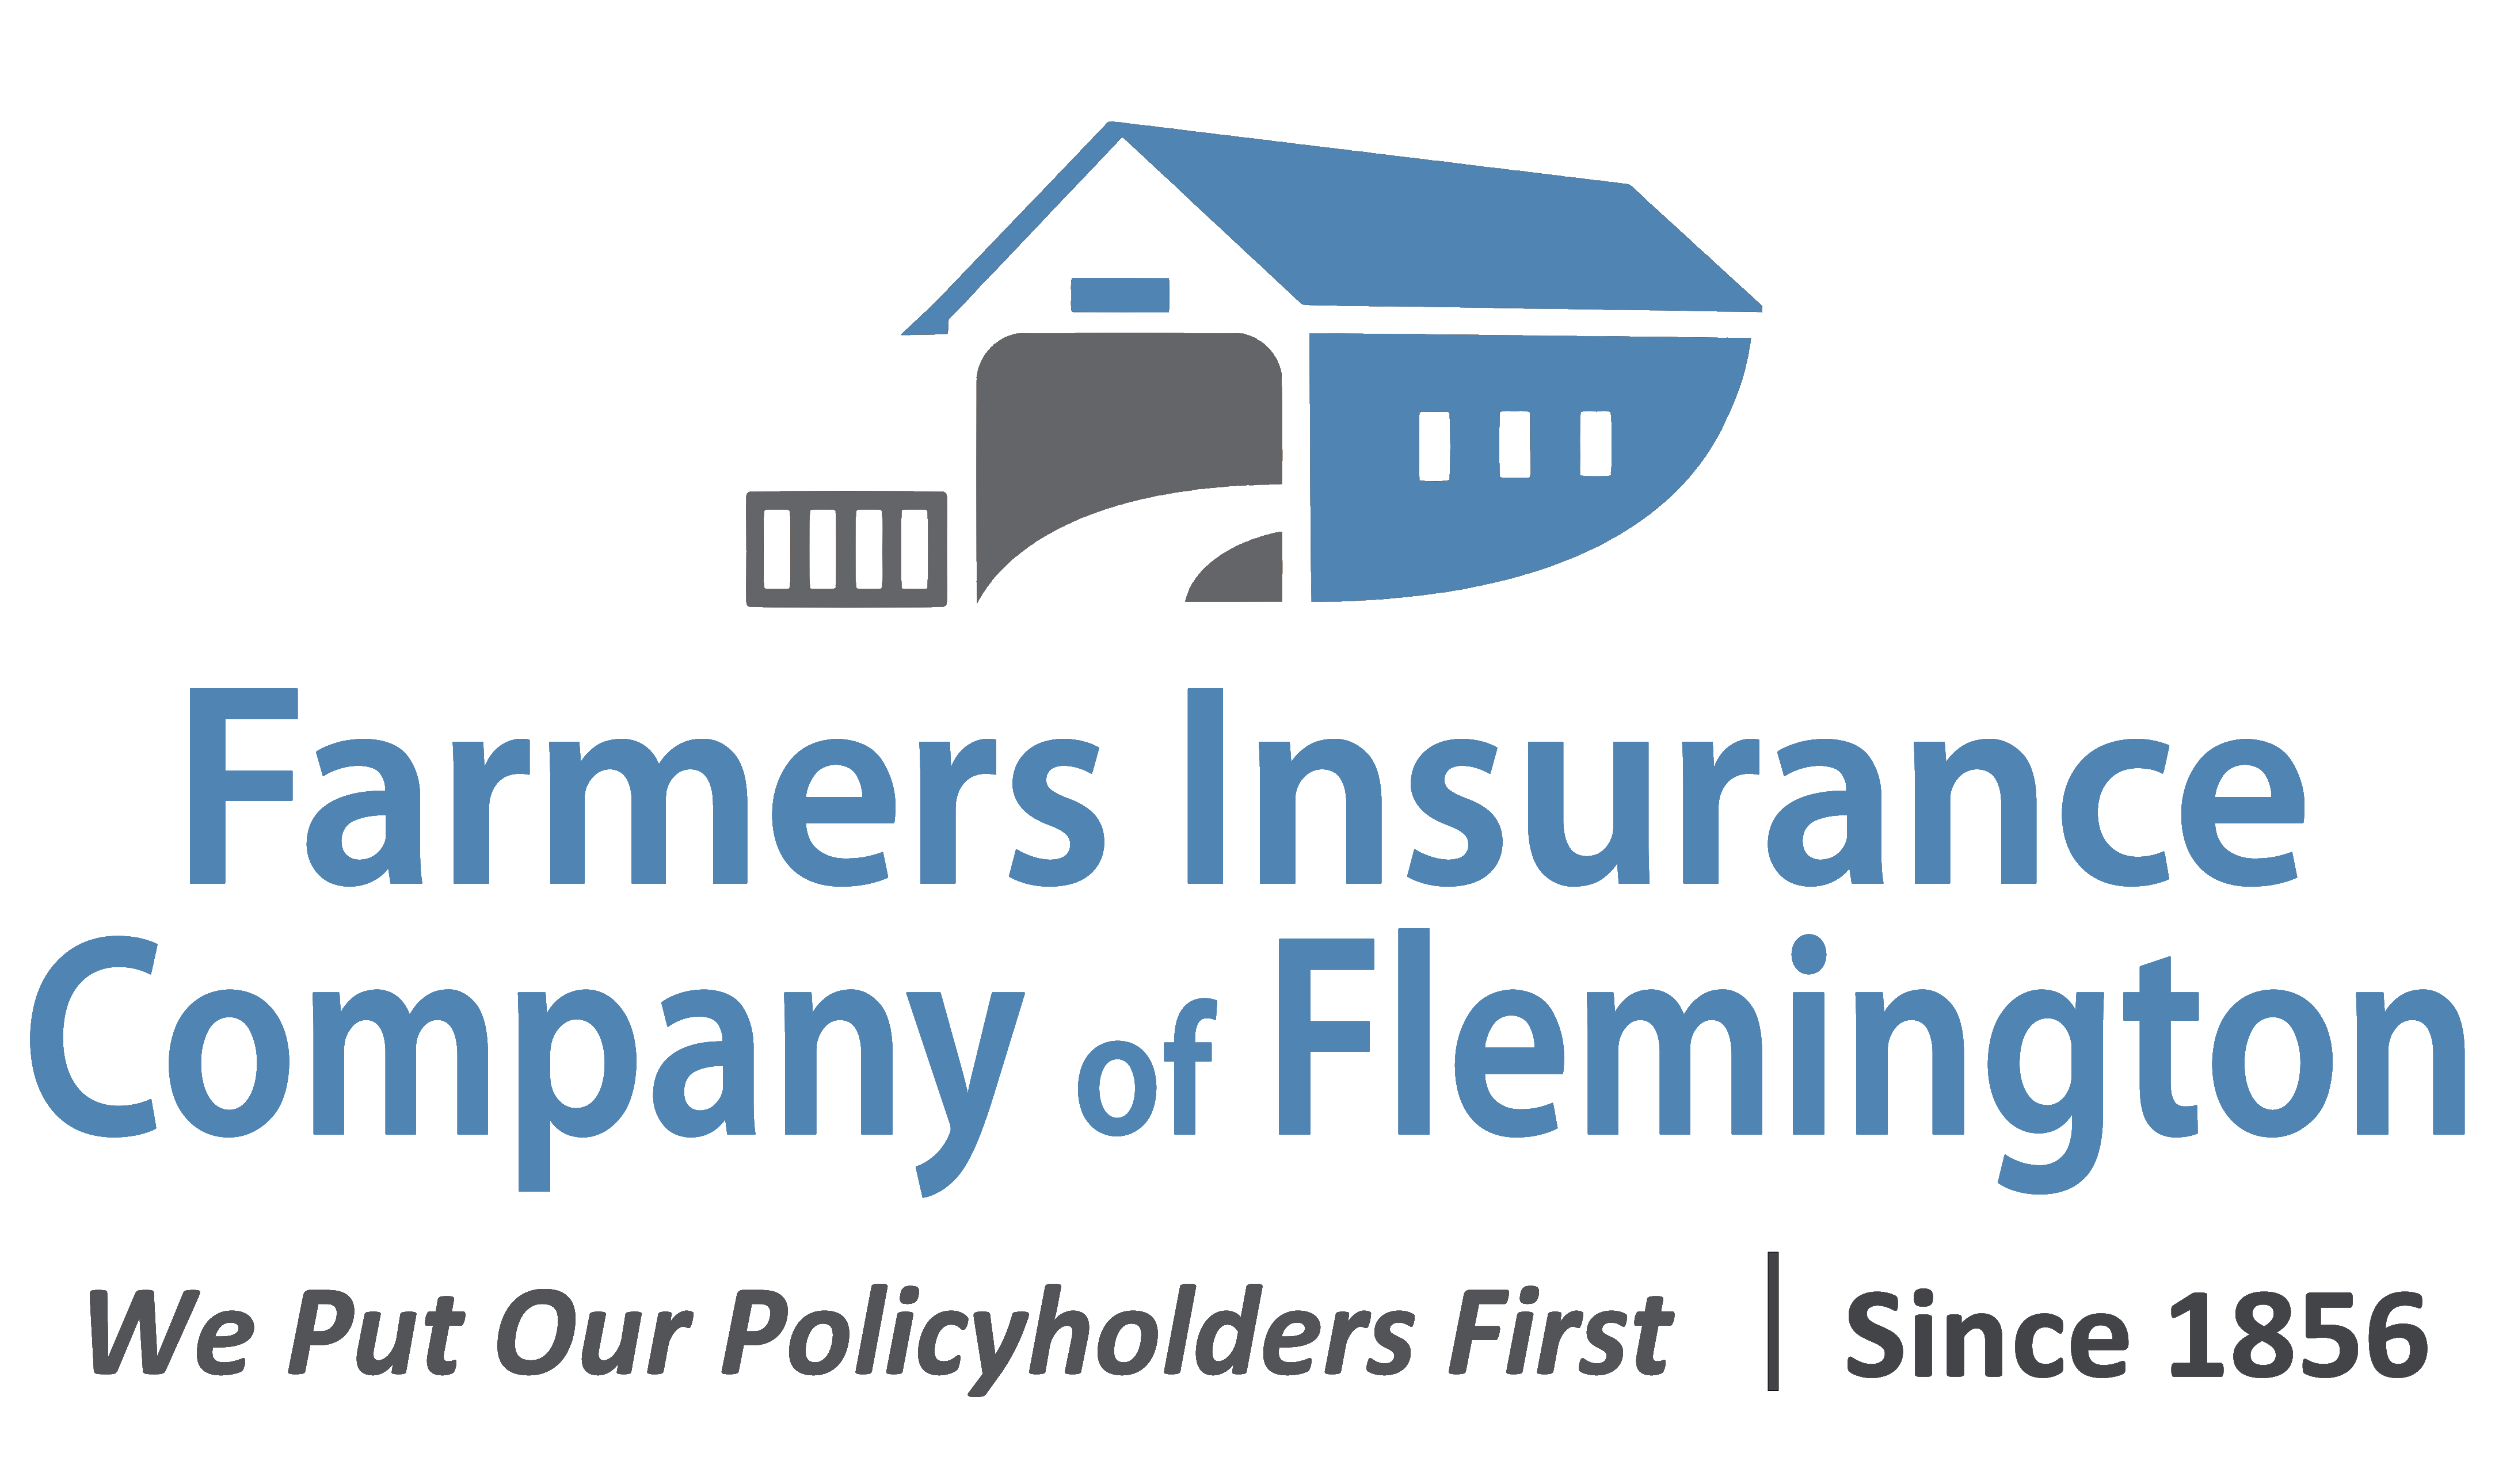 AM Best Affirms Financial Strength Rating of Farmers Insurance Company of Flemington